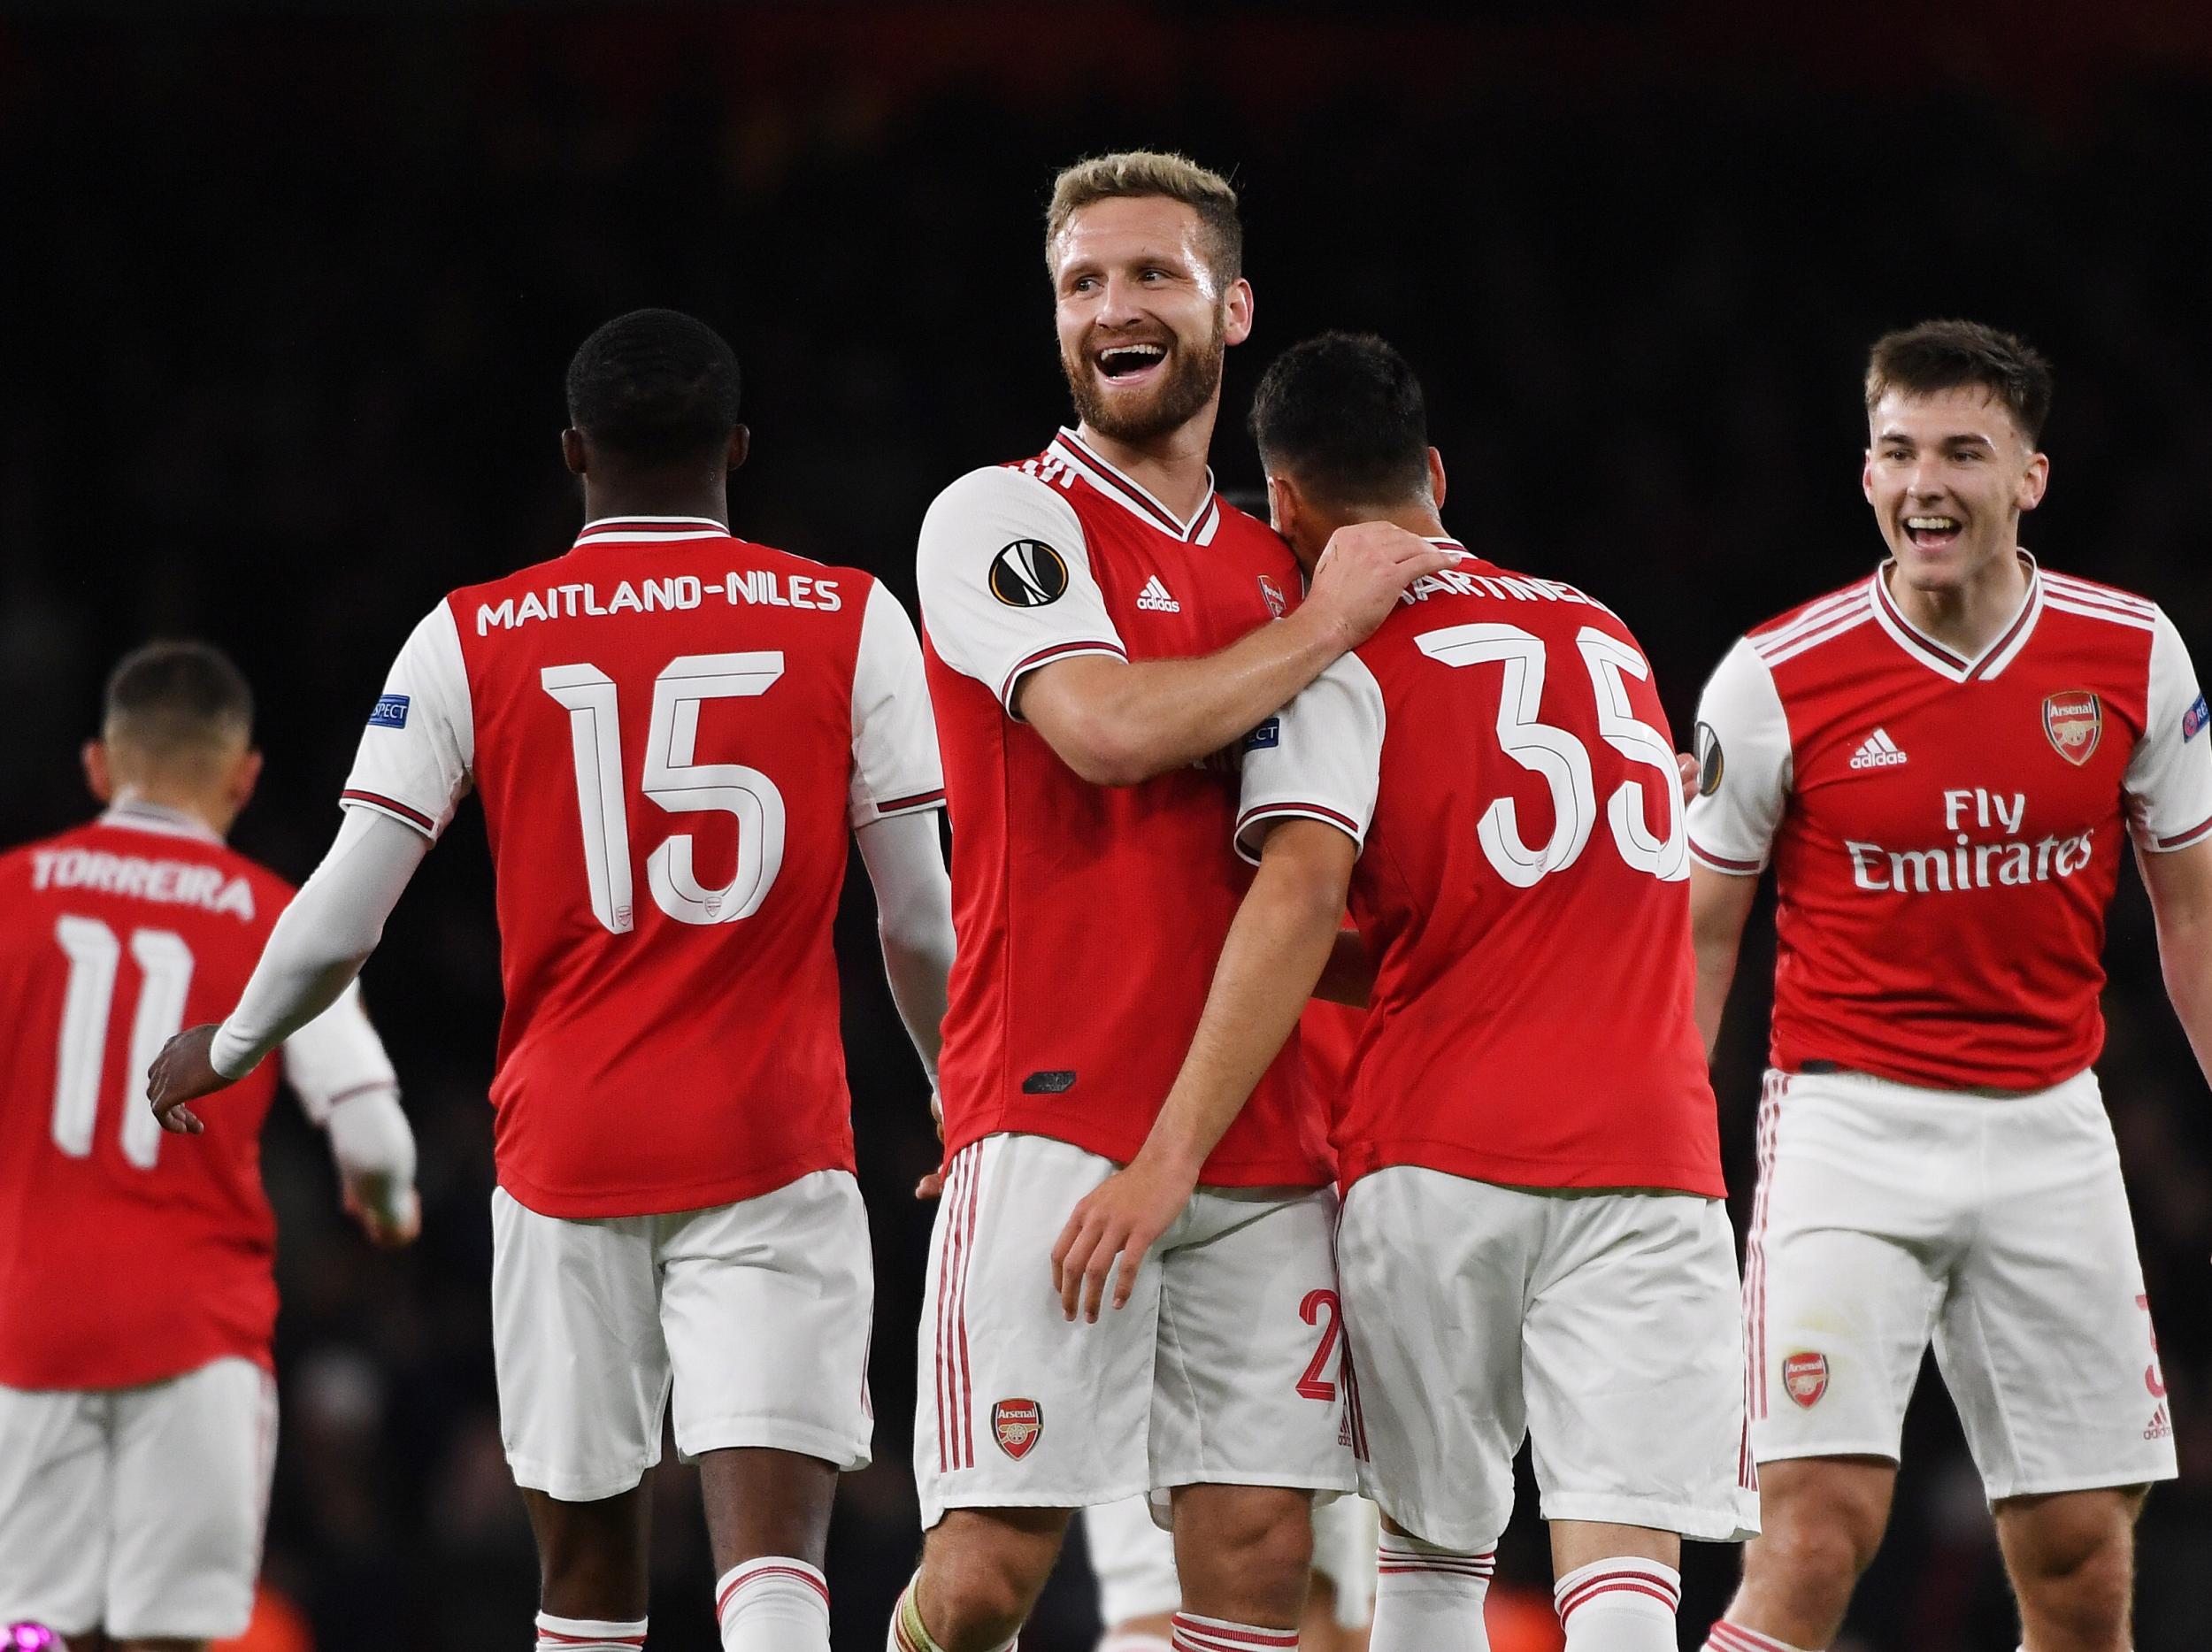 Arsenal vs Standard Liege LIVE: Stream, score and latest goal updates from Europa League fixture